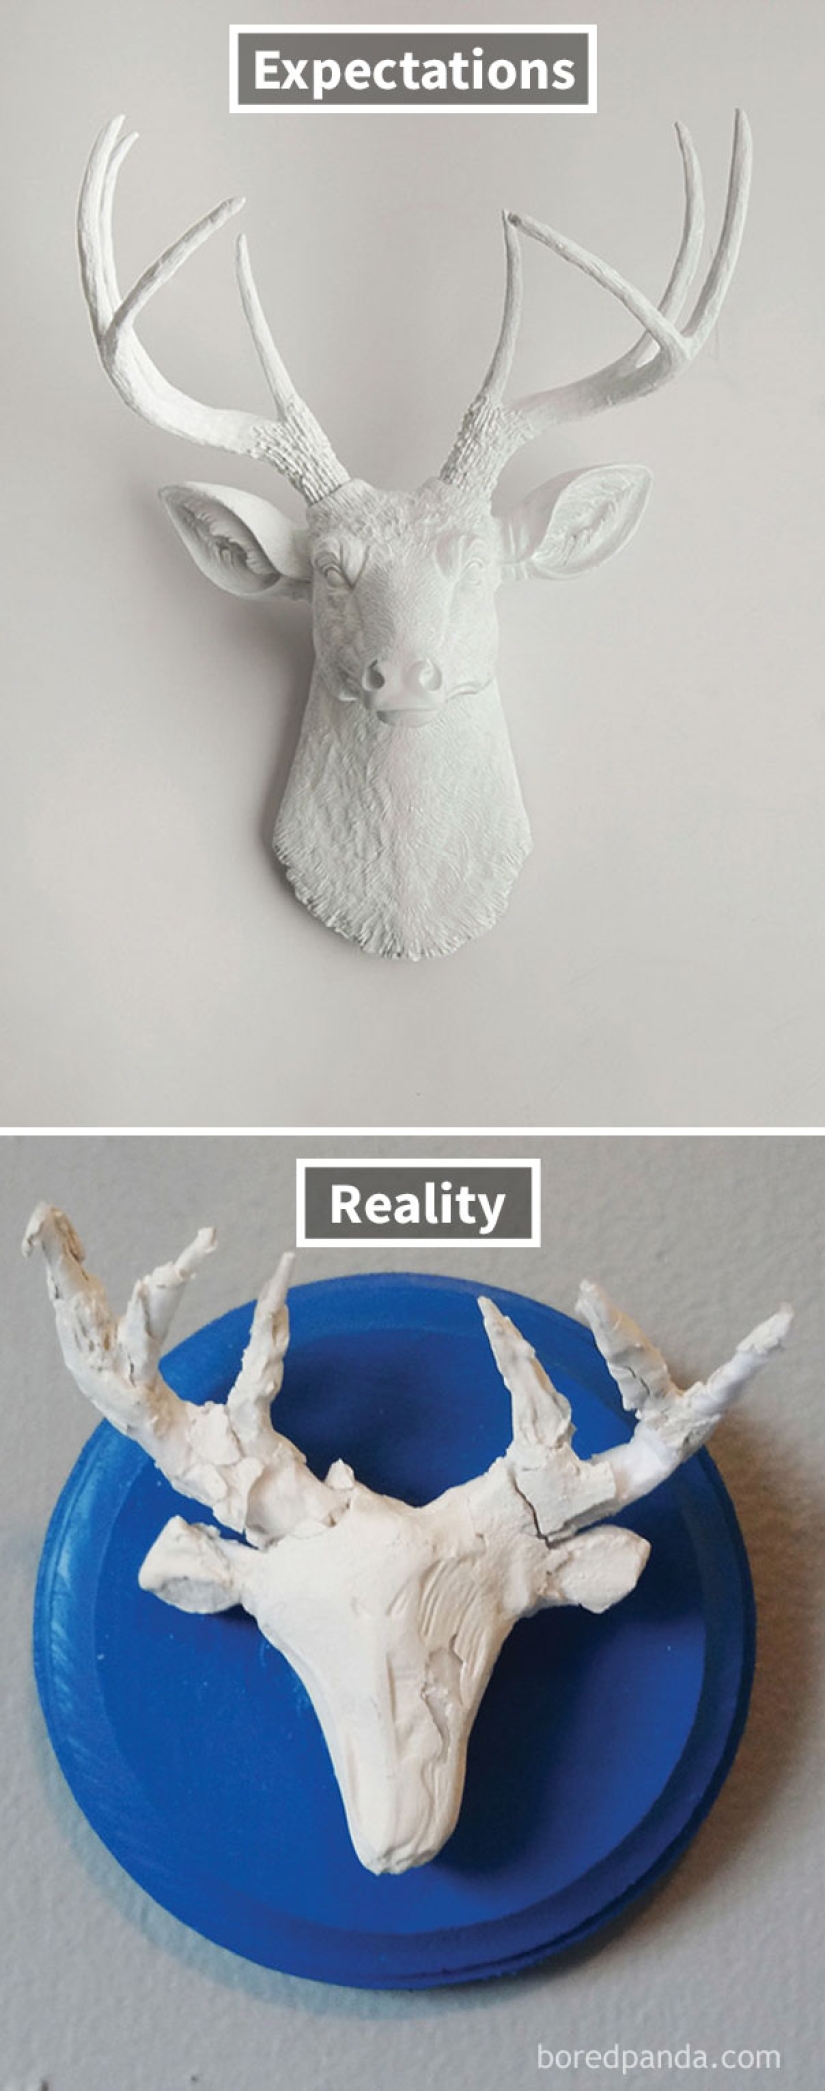 Creative crafts with your own hands: expectation and reality